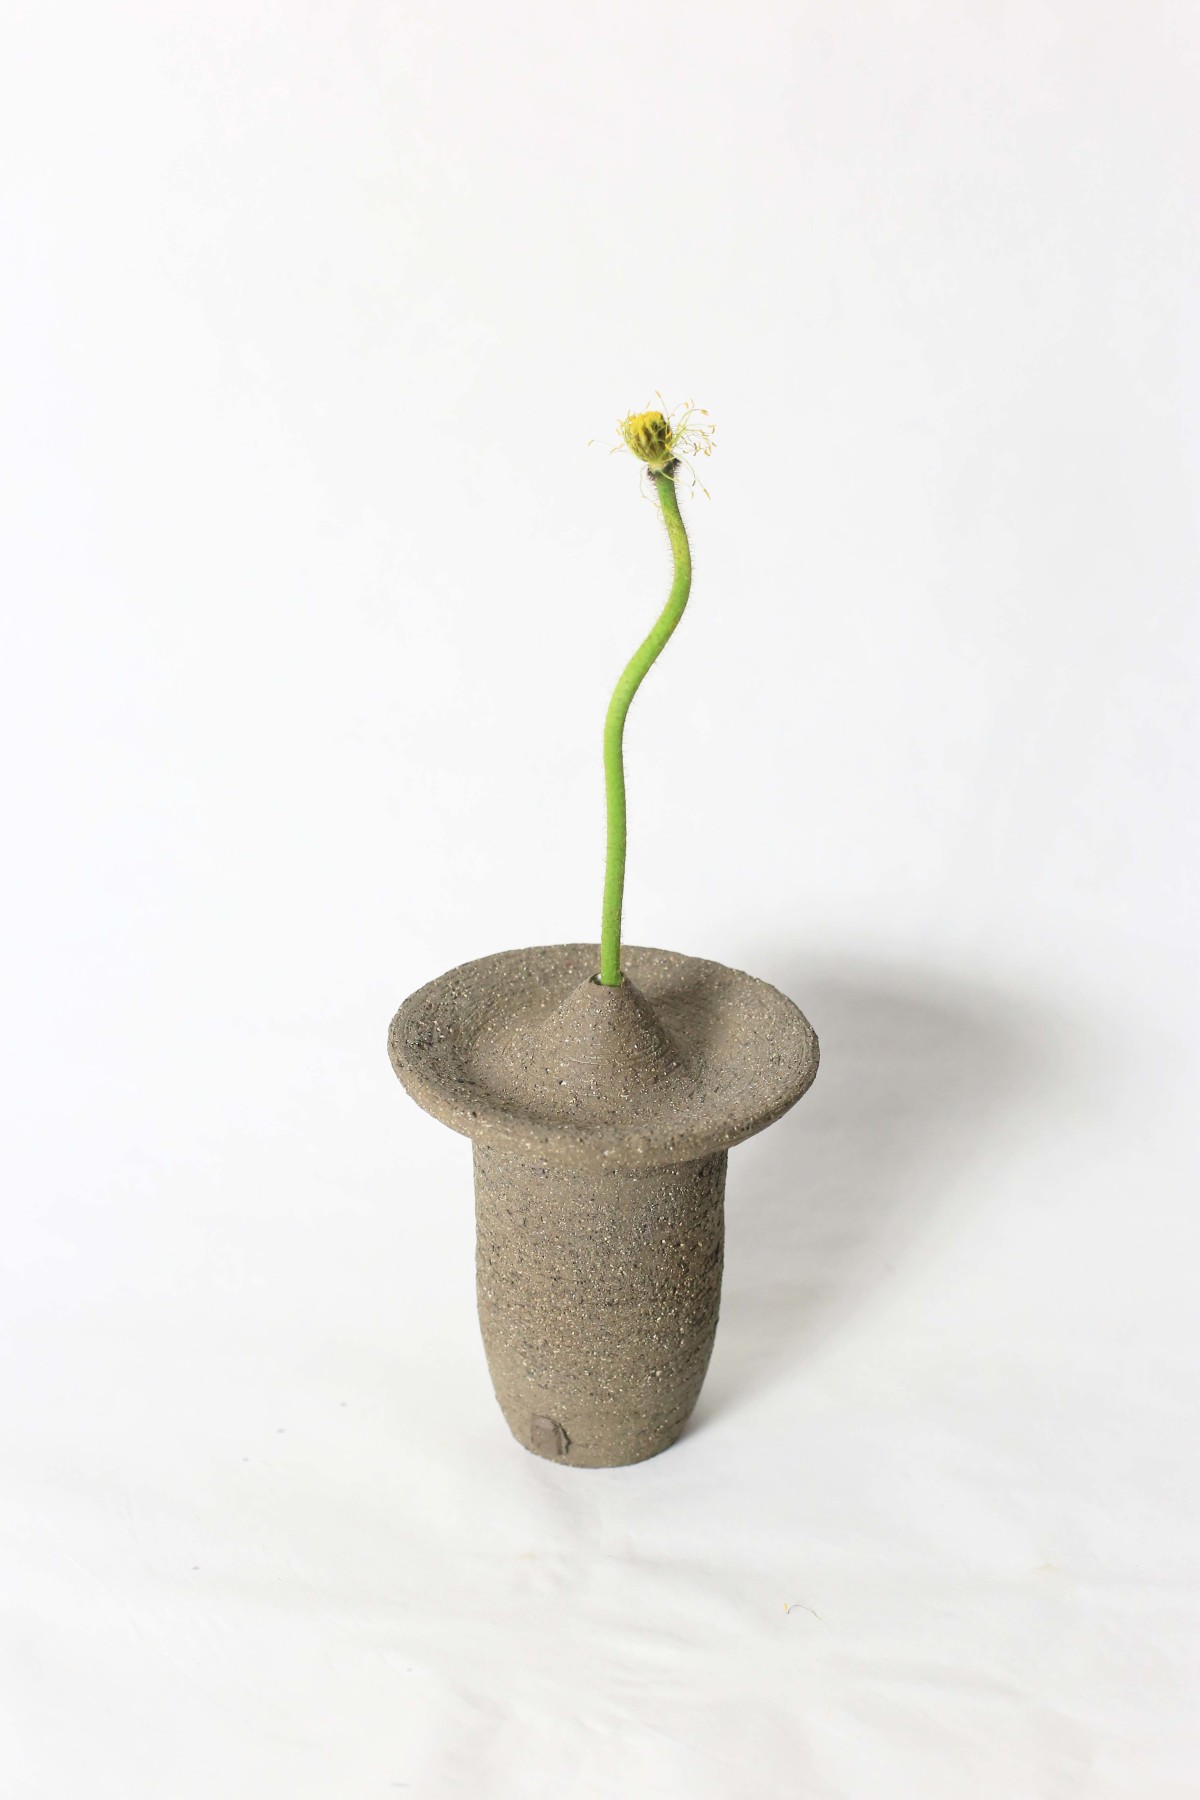 Ufo shaped gray ceramic vase with a flower stem on a white background view from above 1